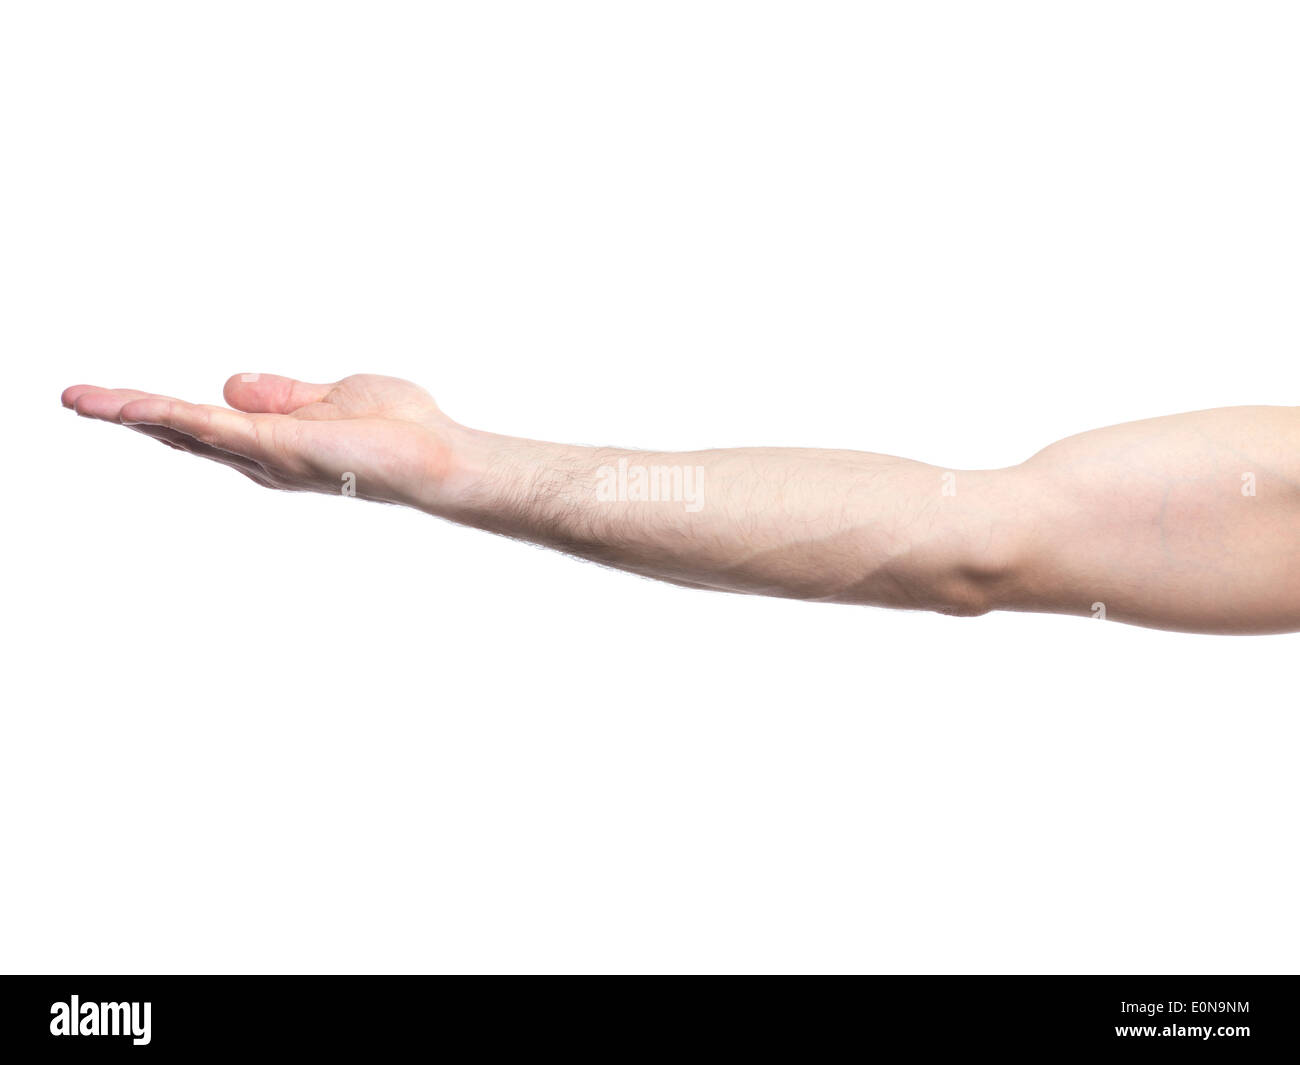 Man arm with open palm facing up isolated on white background Stock Photo